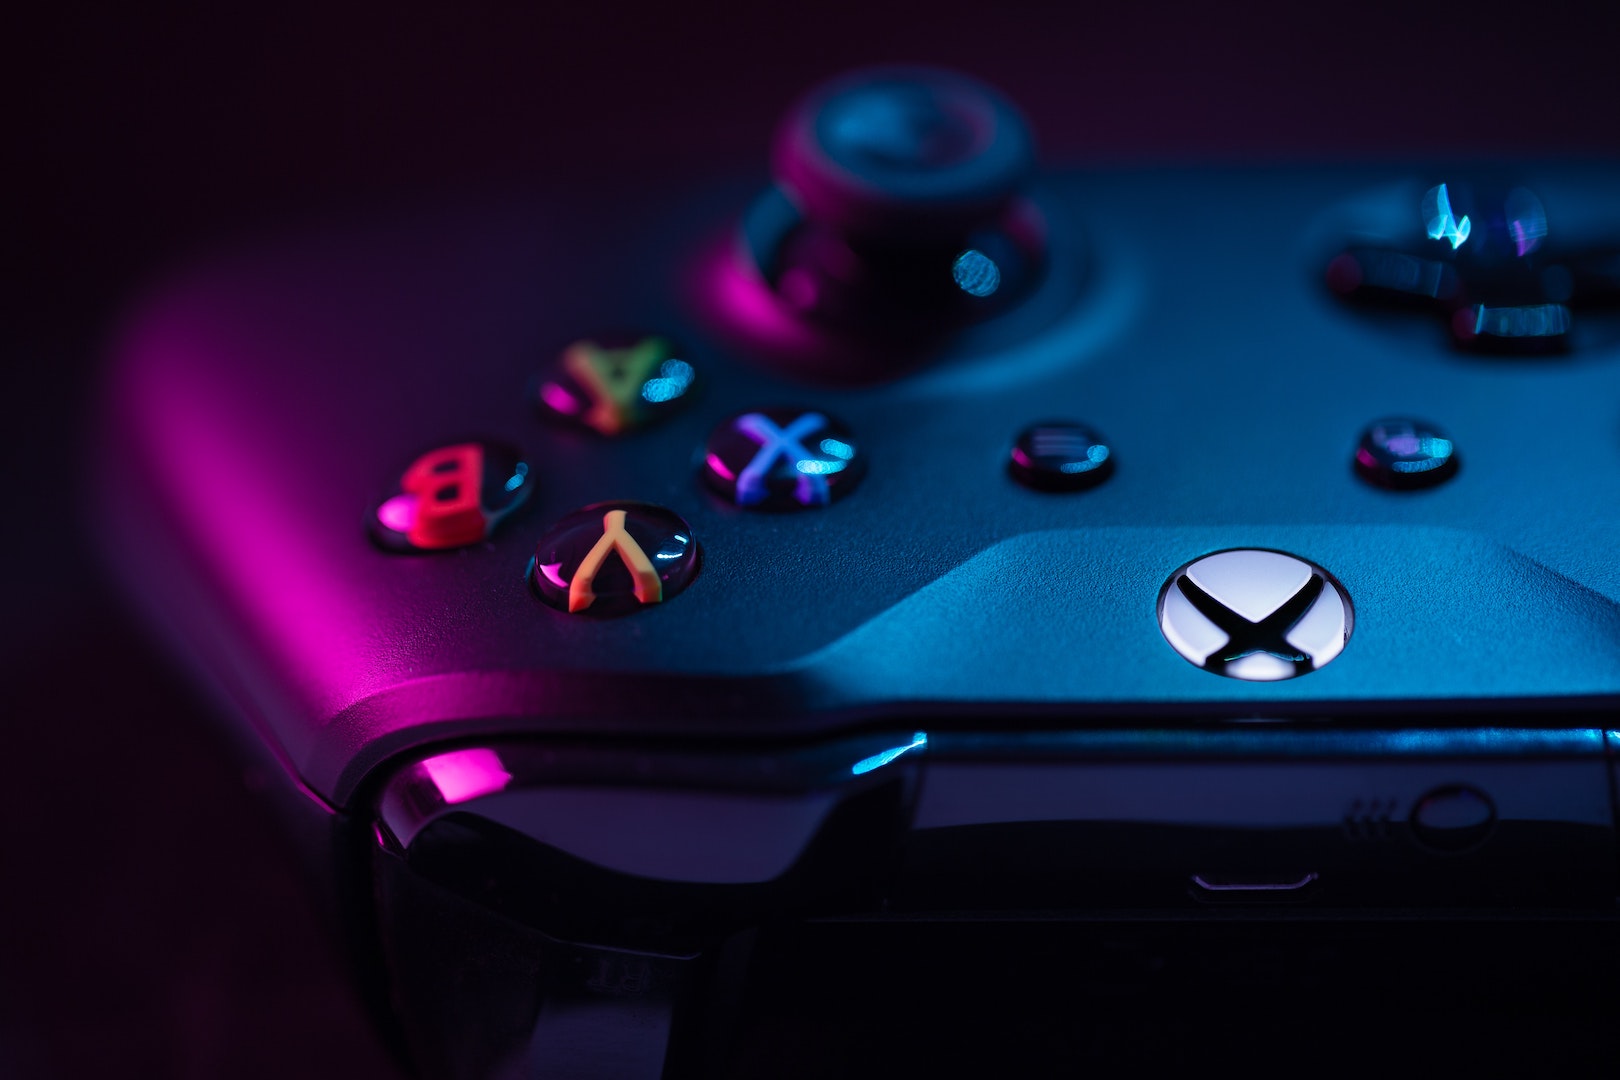 Choosing the correct game controller for your PC